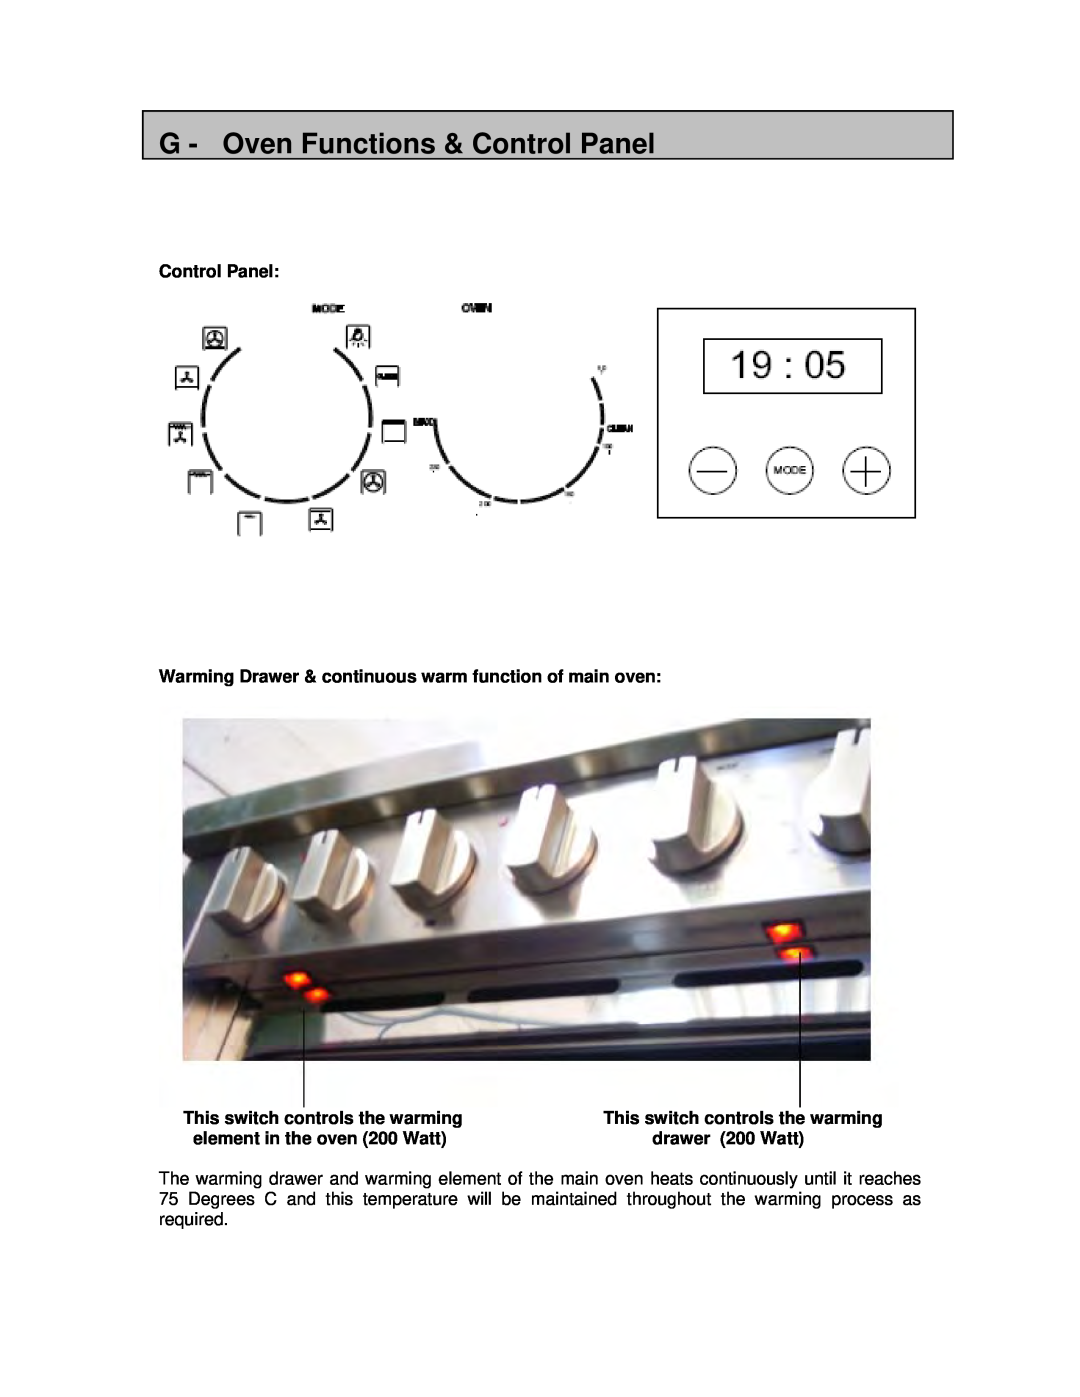 AEG 3007VNM-M G - Oven Functions & Control Panel, Control Panel Warming Drawer & continuous warm function of main oven 